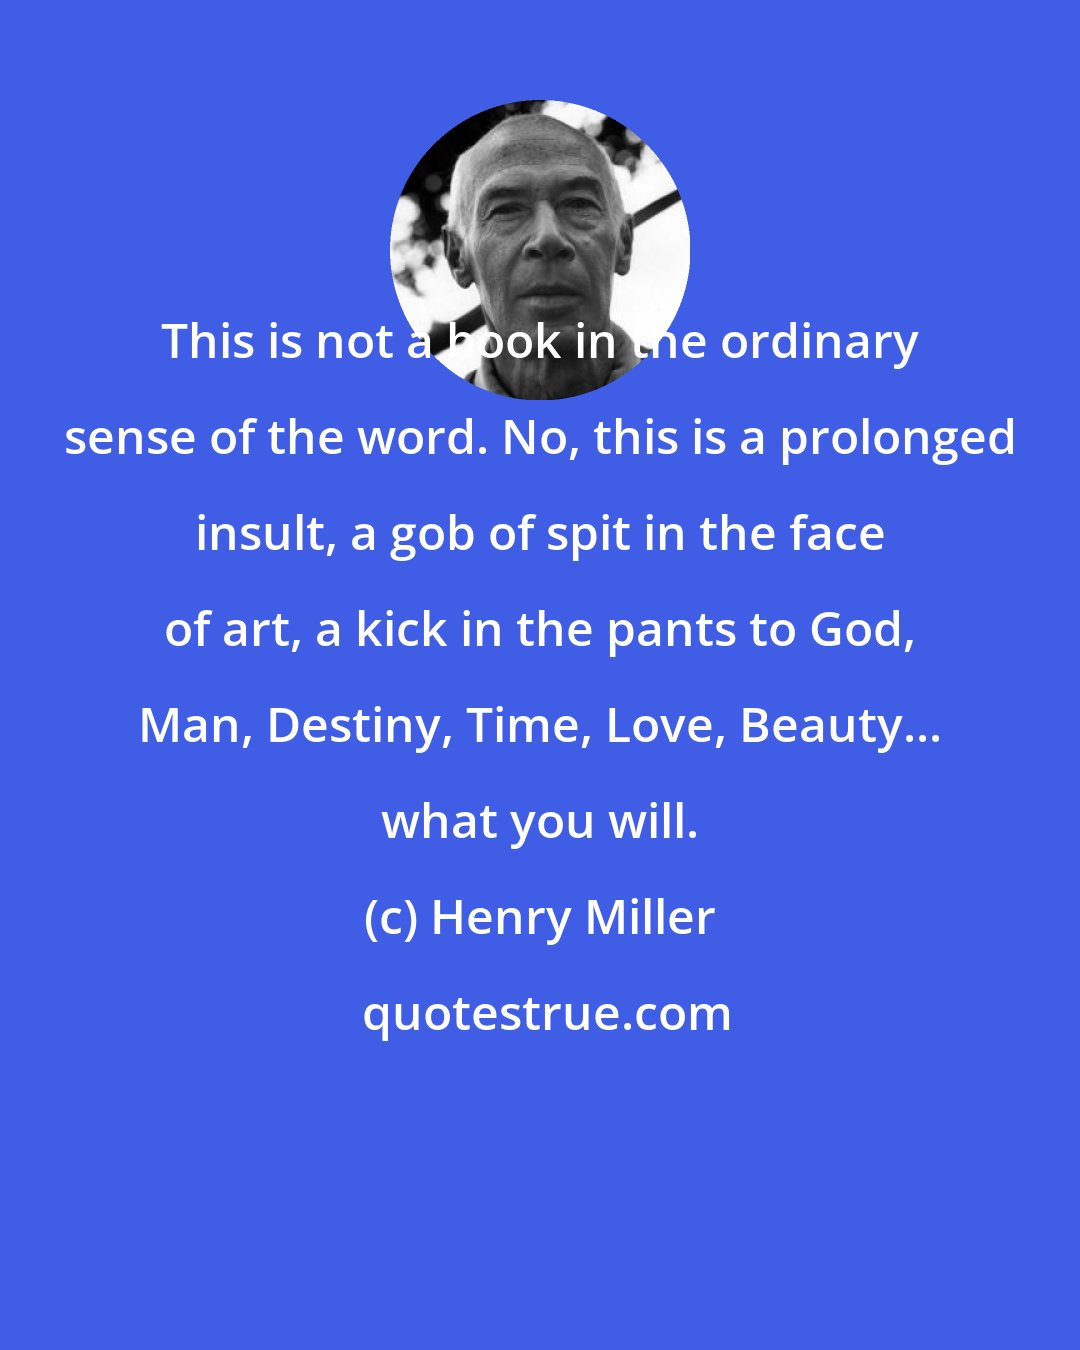 Henry Miller: This is not a book in the ordinary sense of the word. No, this is a prolonged insult, a gob of spit in the face of art, a kick in the pants to God, Man, Destiny, Time, Love, Beauty... what you will.